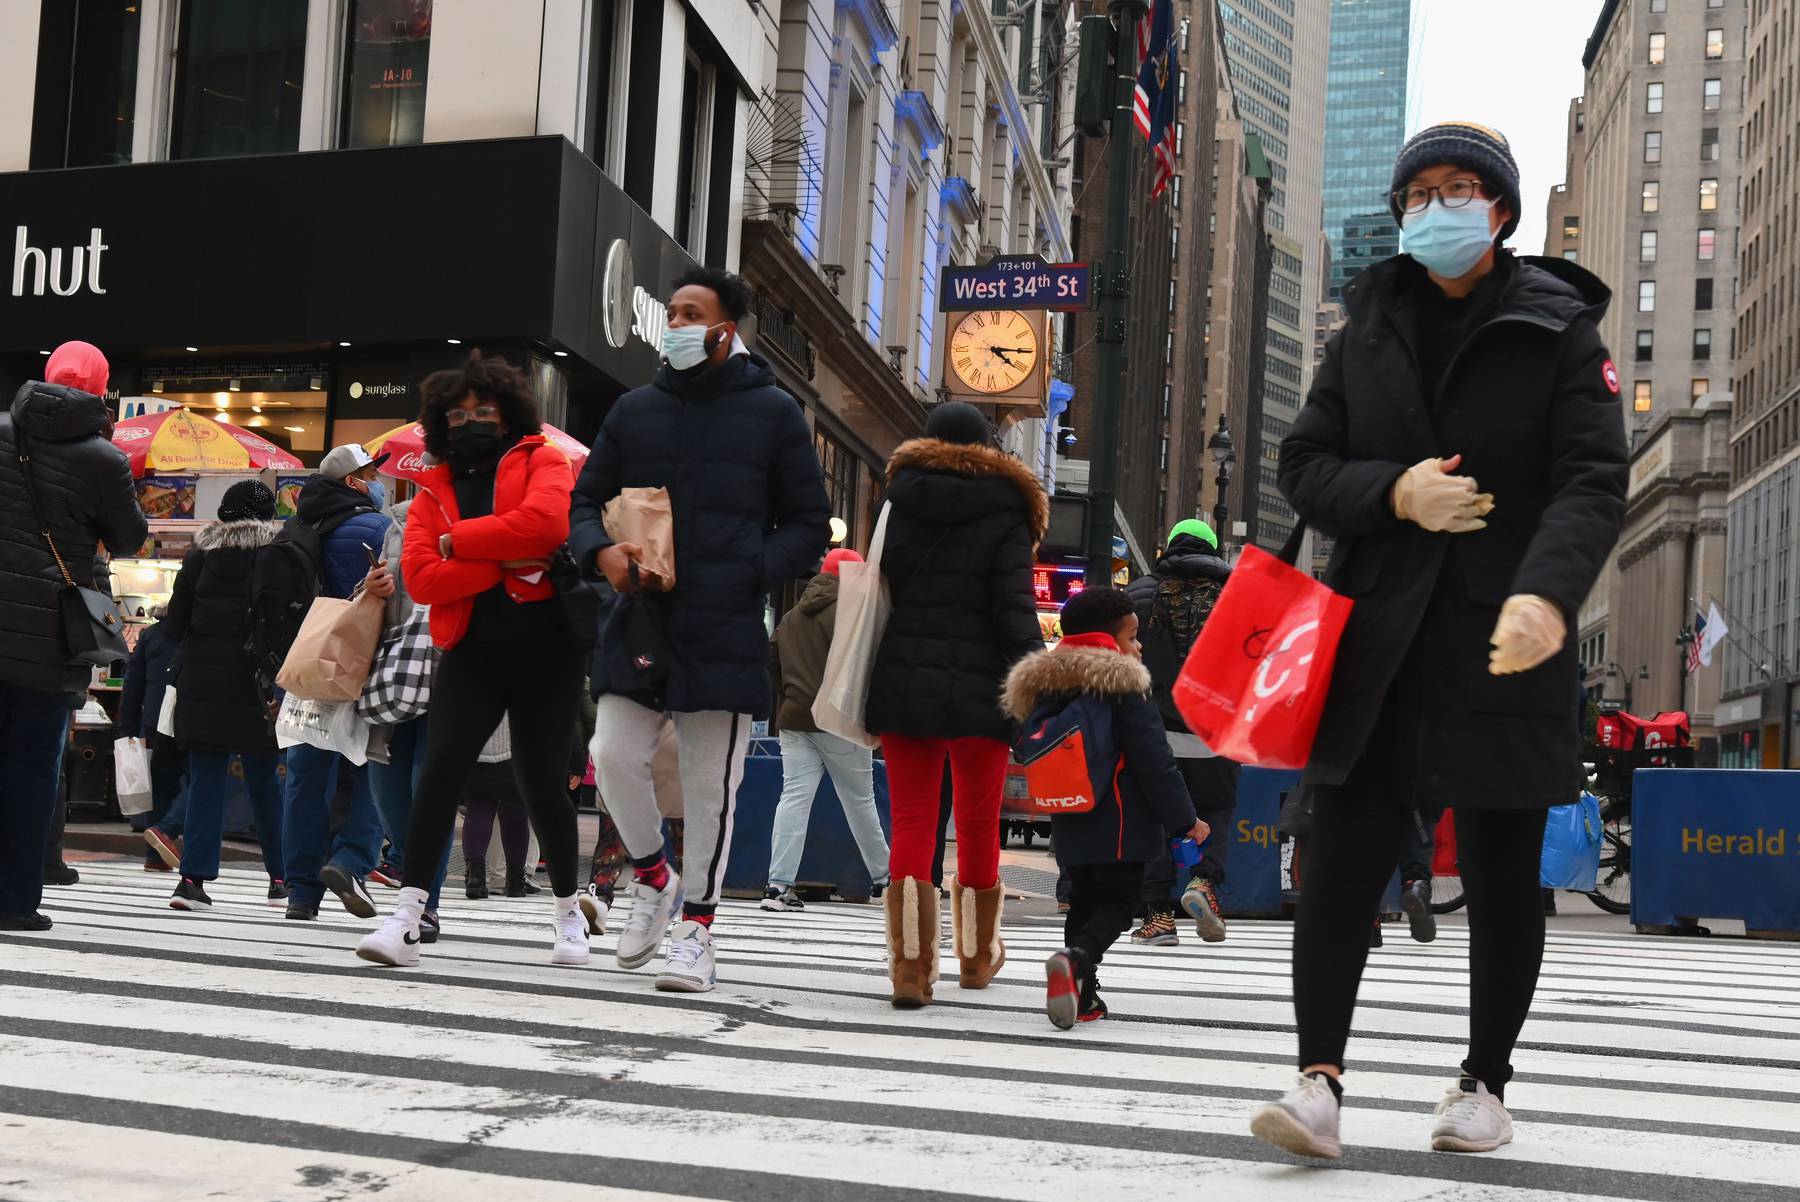 People wear face masks as they walk through Herald Square in New York City in January 2021. Getty Images.